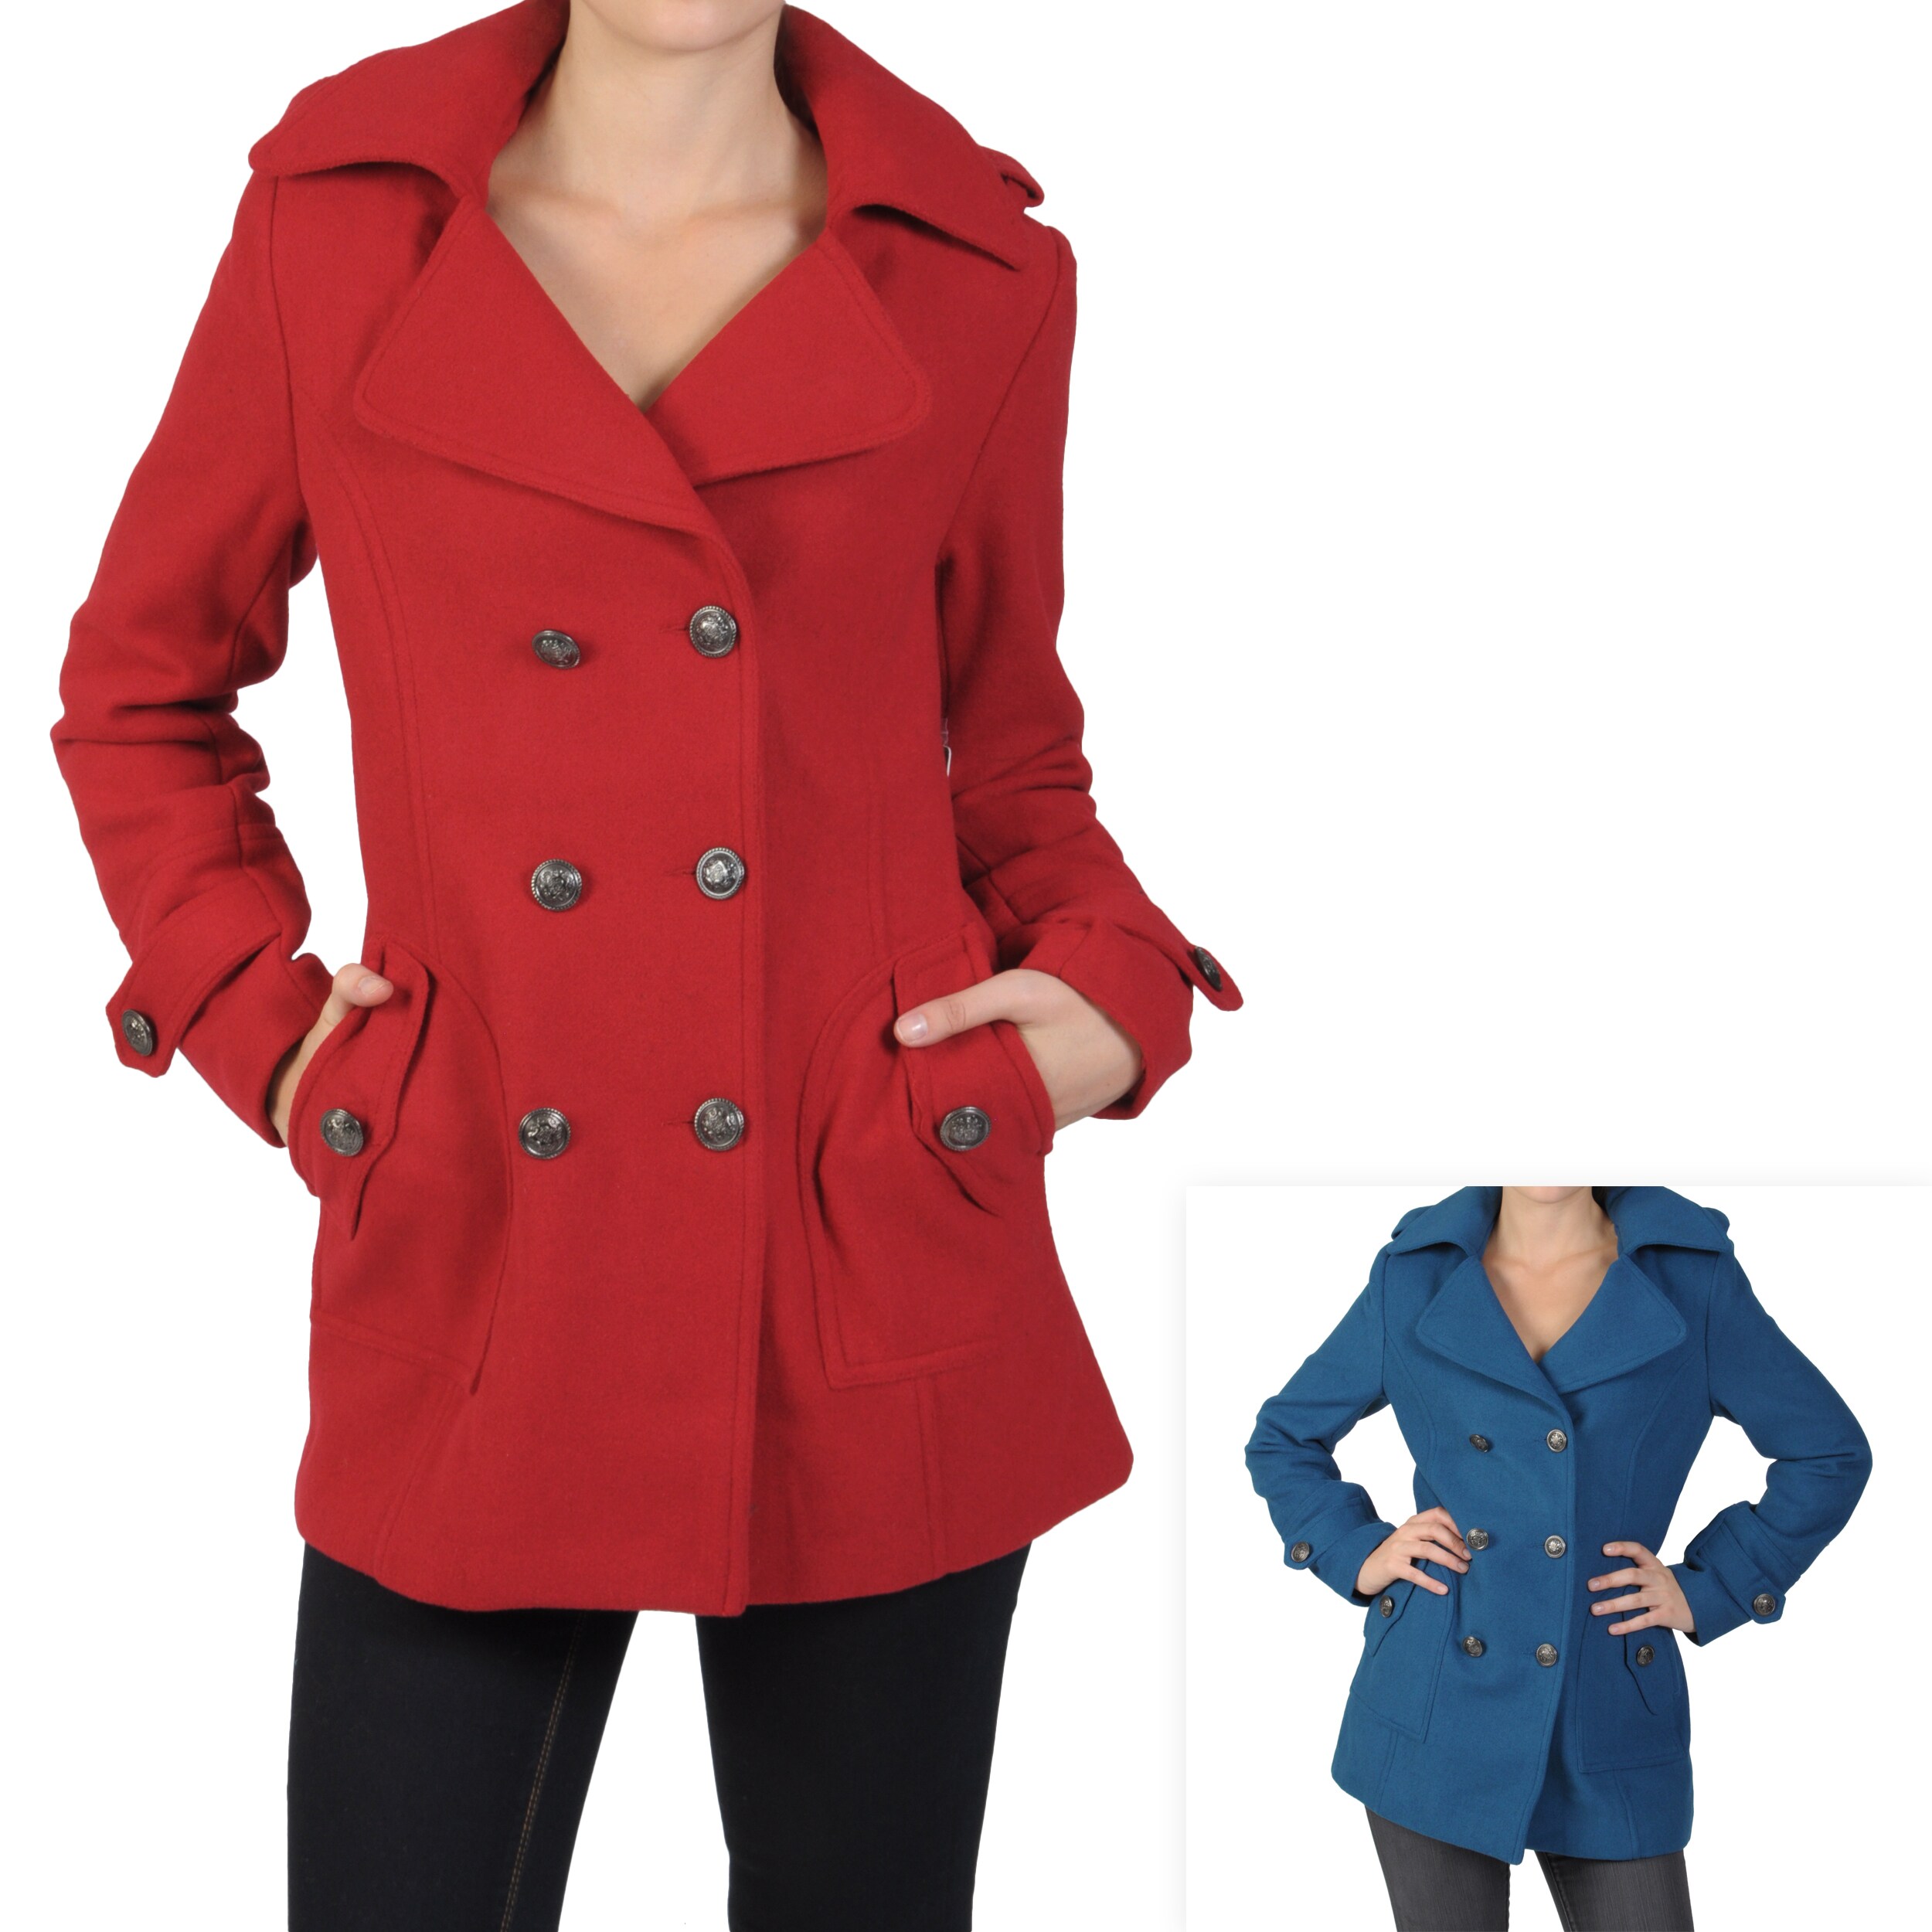 Journee Collection Junior's Double-breasted Peacoat